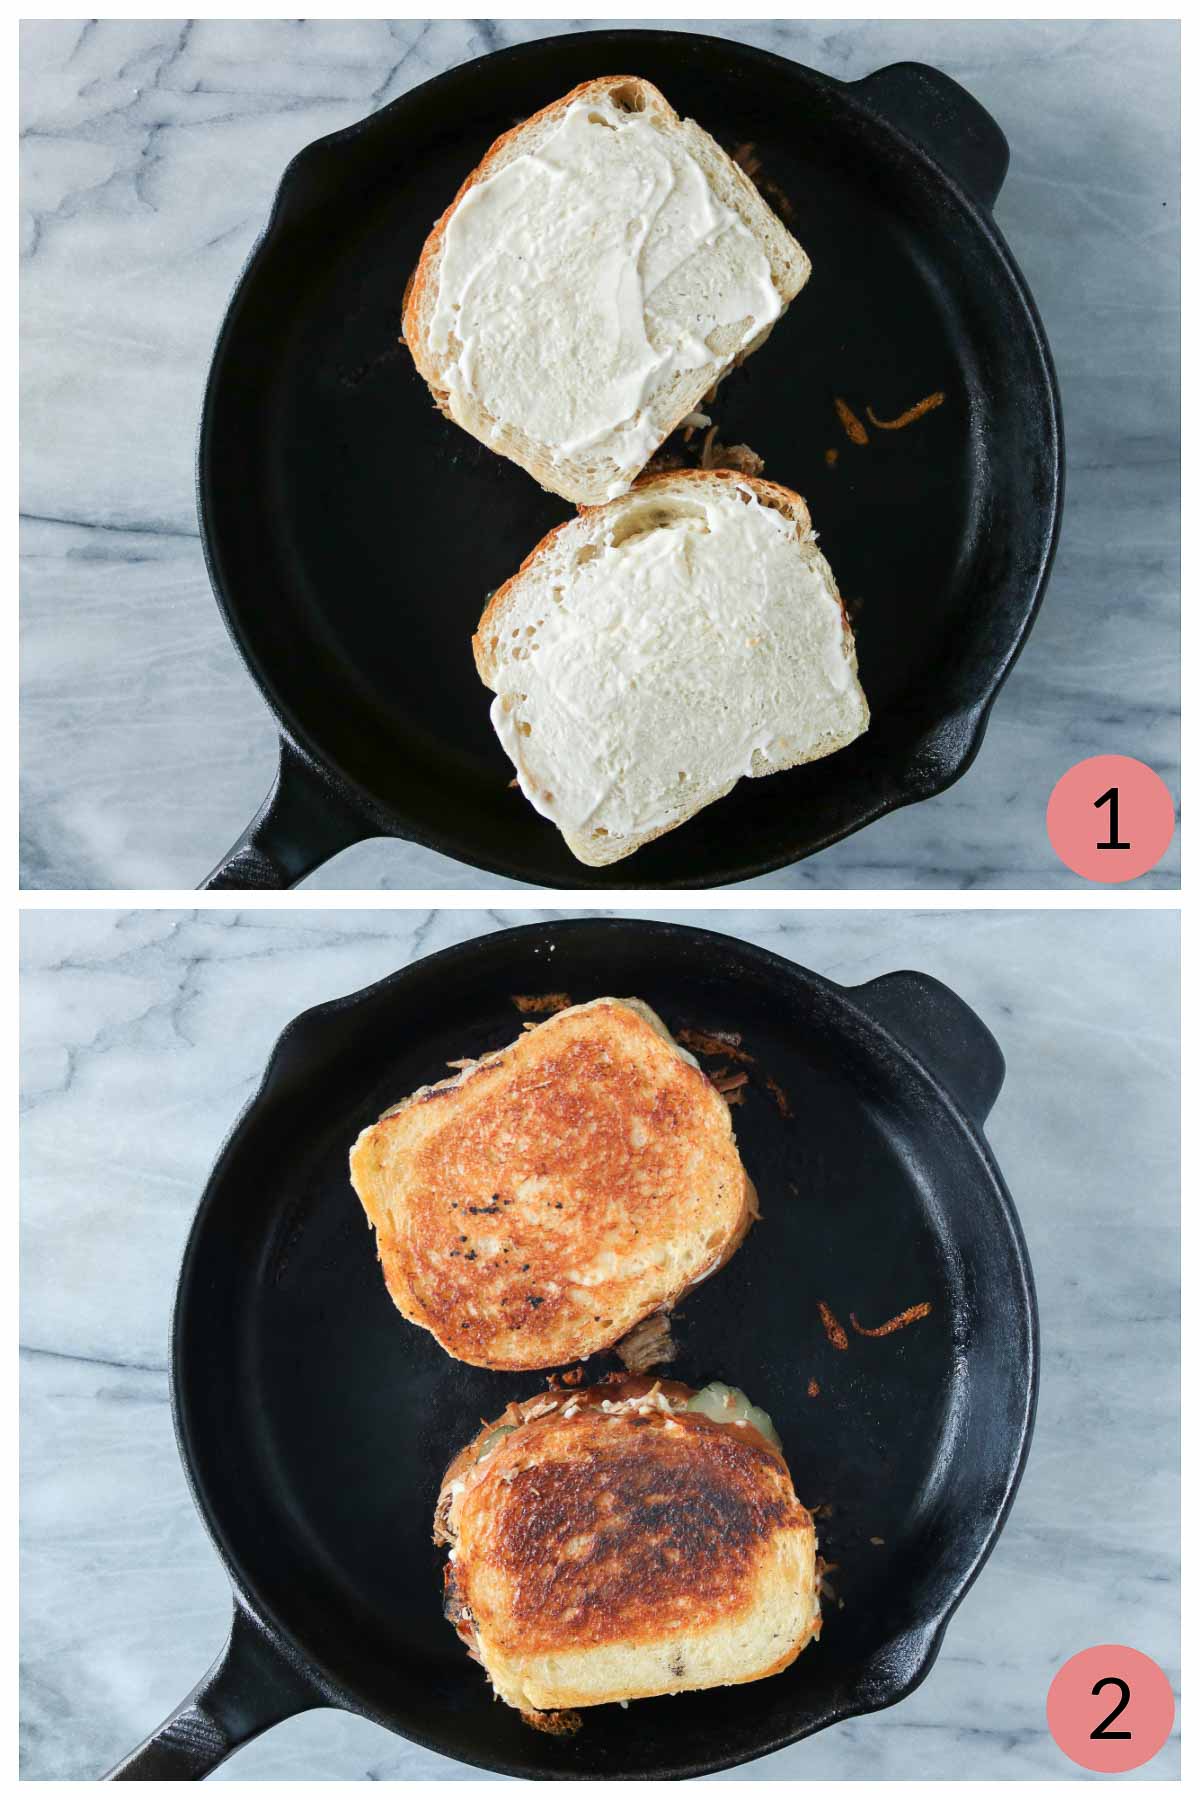 Collage of two sandwiches: before and after grilling in a skillet.